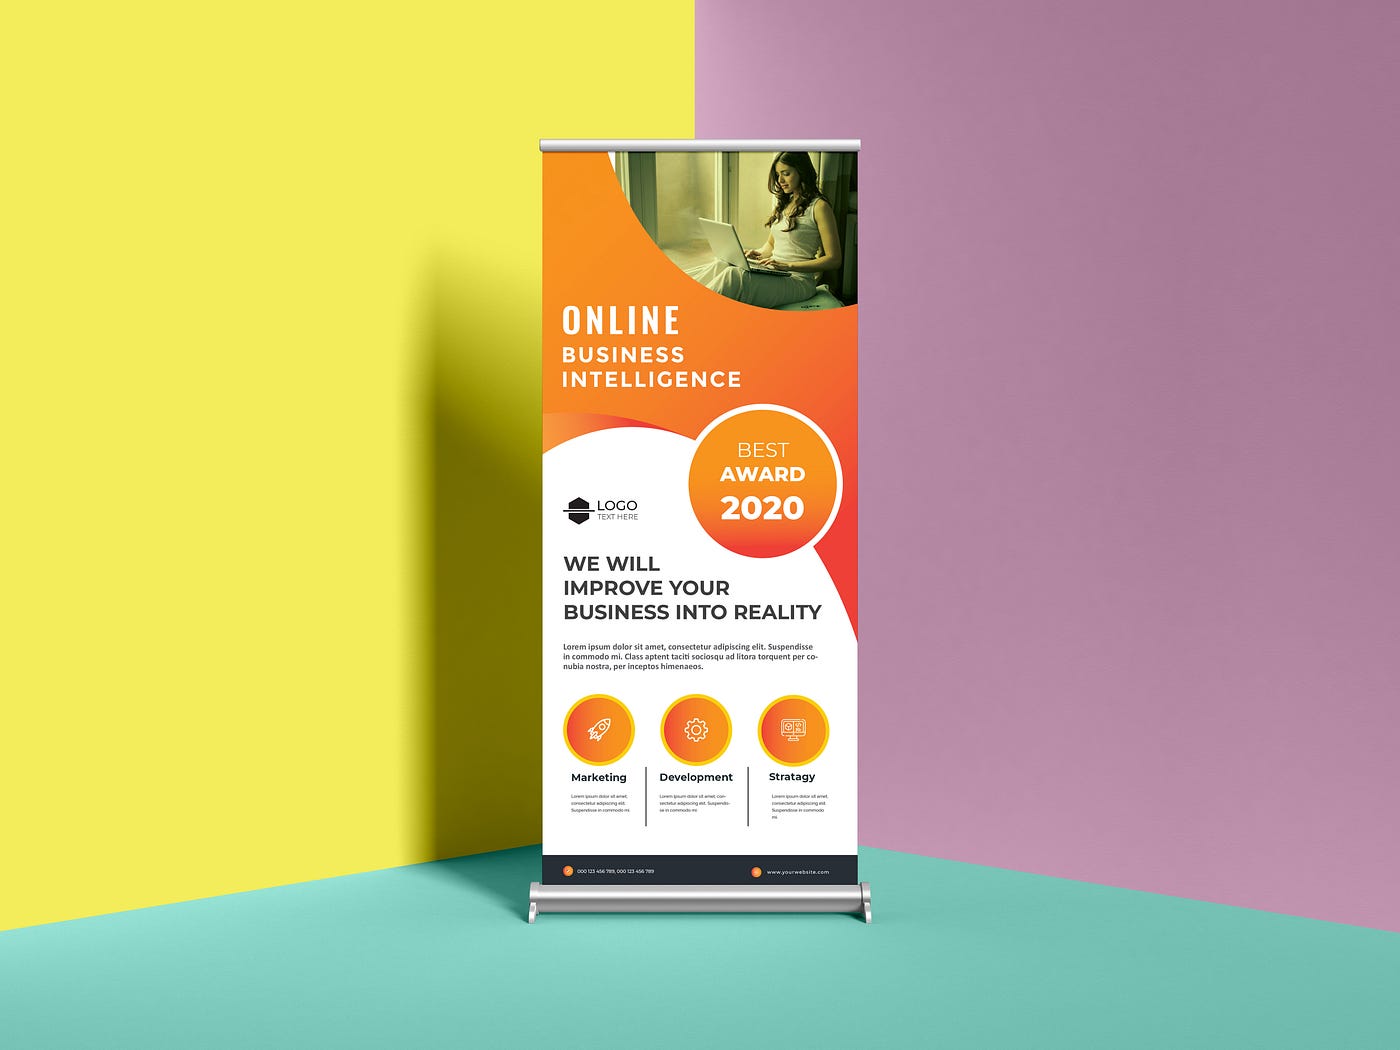 Tips for your Roll-up banner design, by Mk hassan